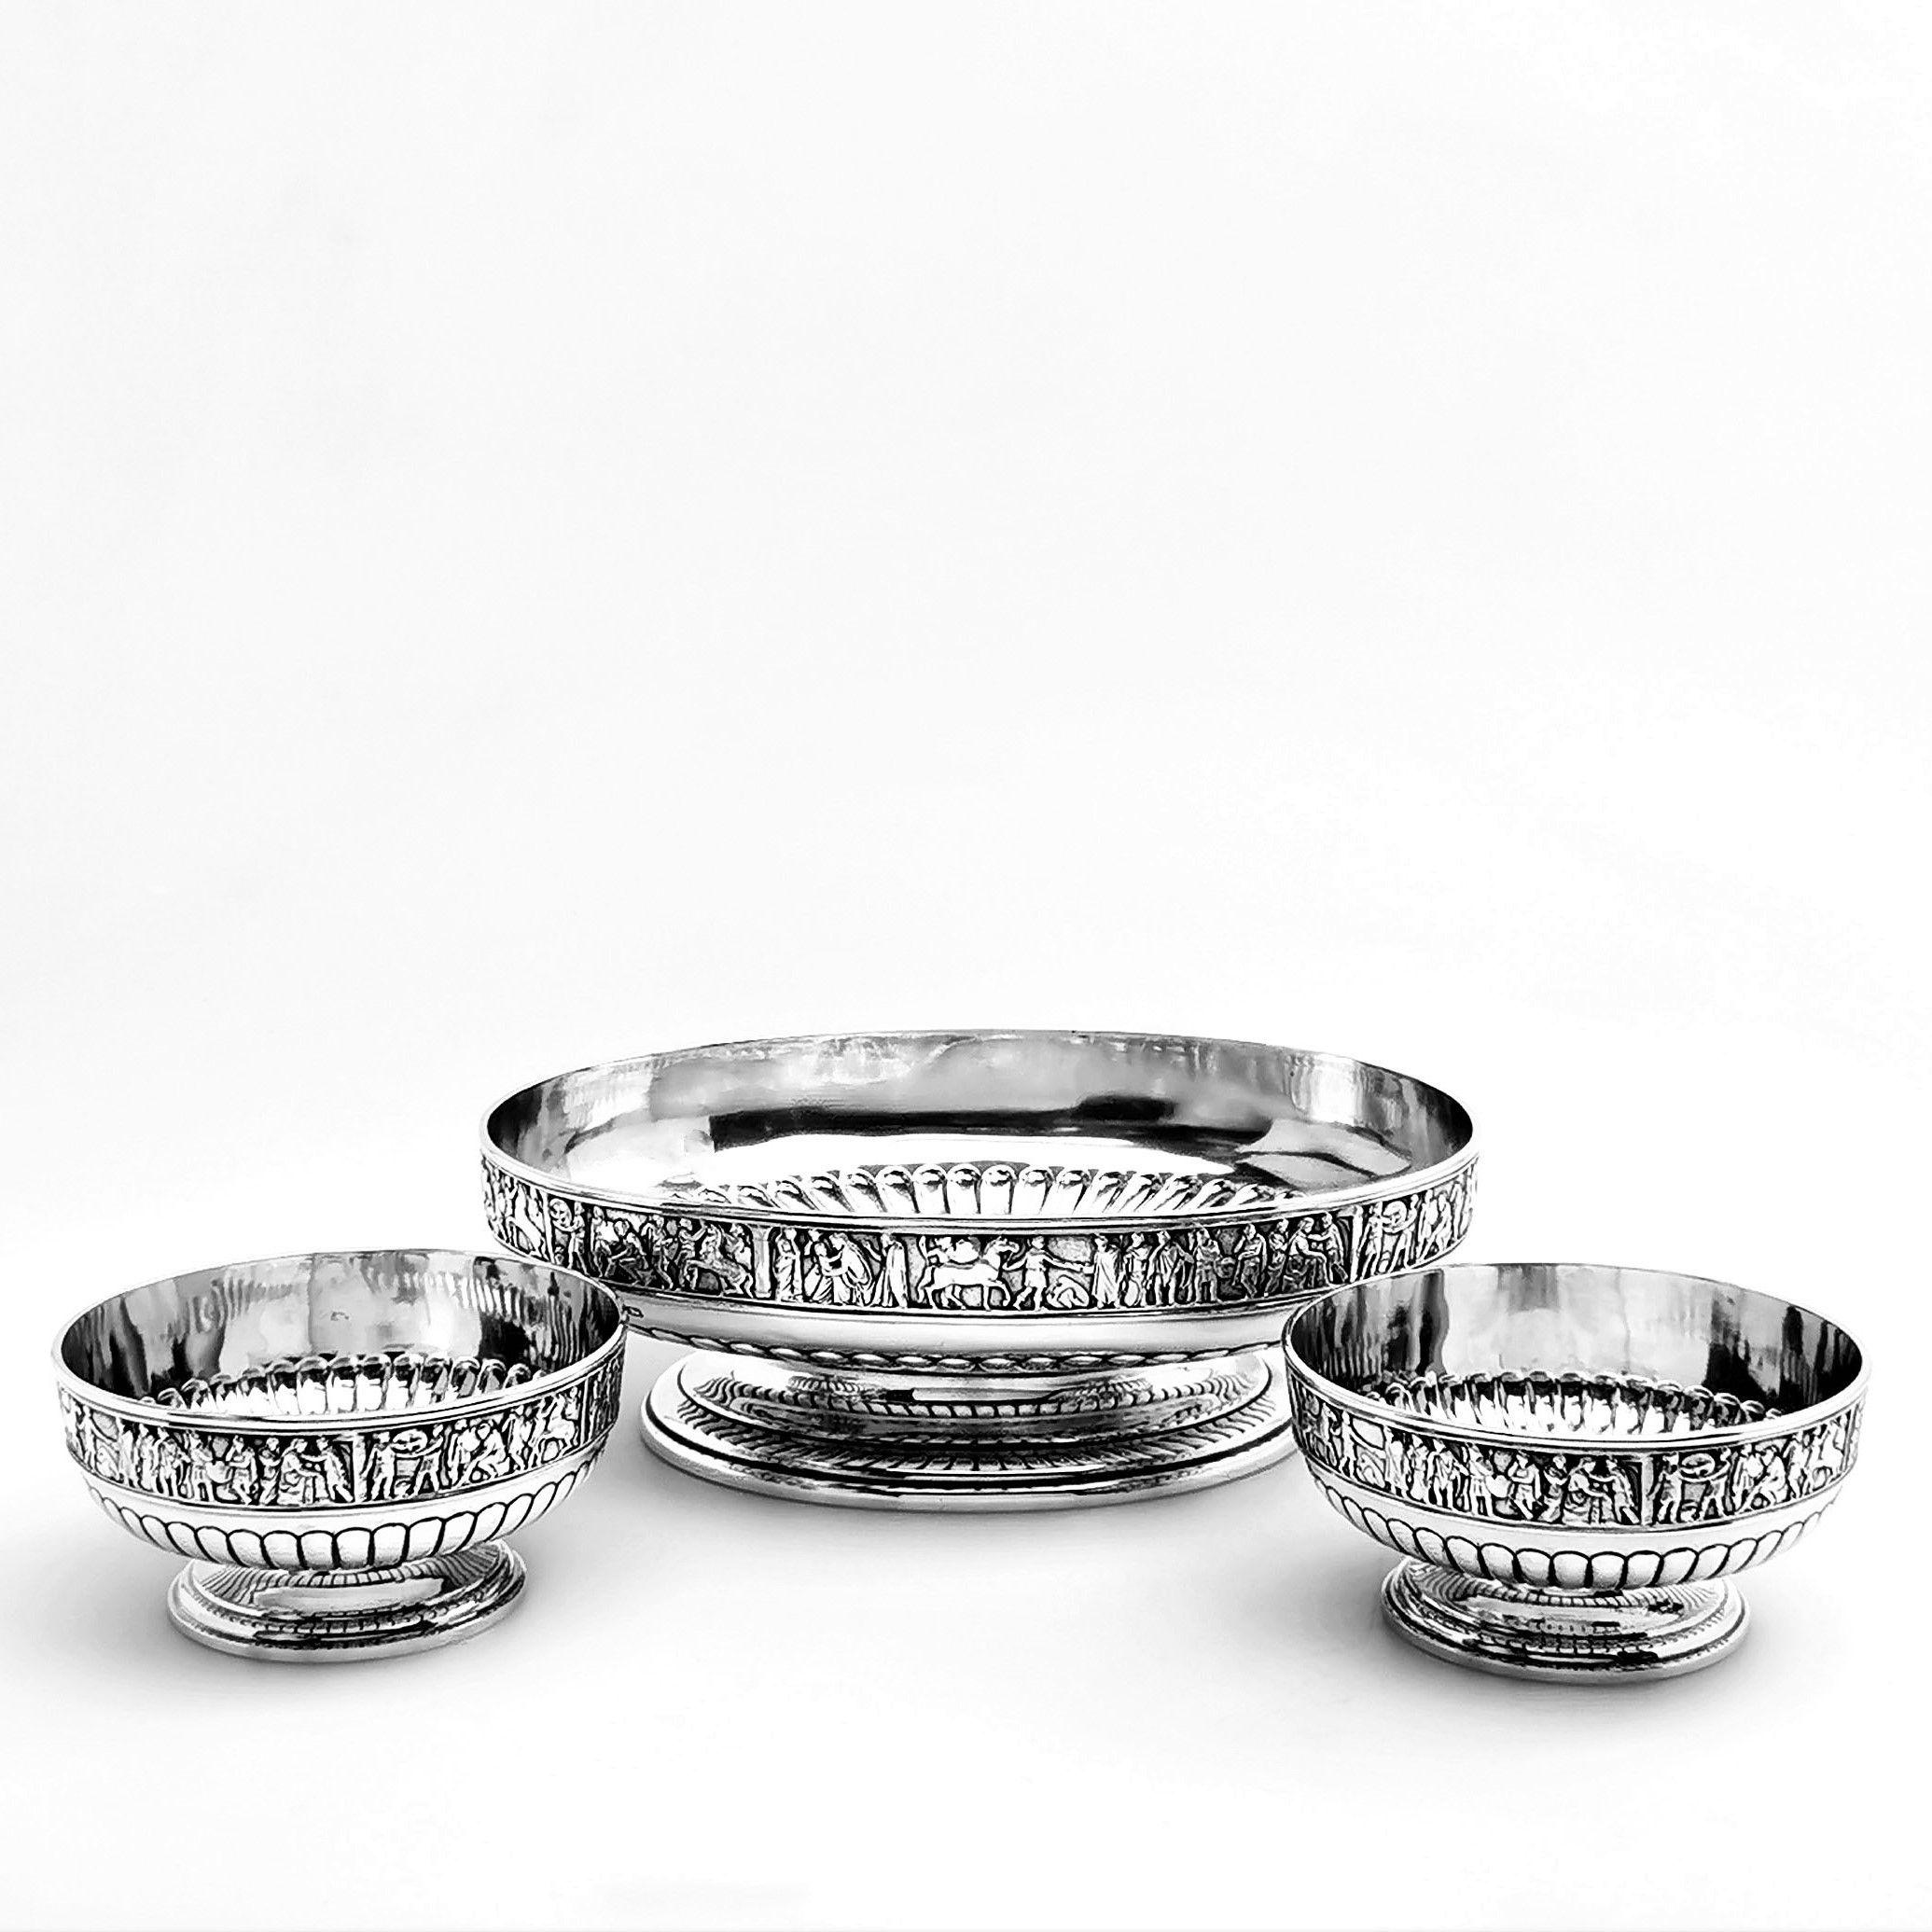 A Suite of Three beautiful Antique Victorian Silver Dishes comprising of a large oval central dish and a pair of round dishes. Each dish is decorated with a band of chased classical figures above a half fluted base. Each dish stands on a spread